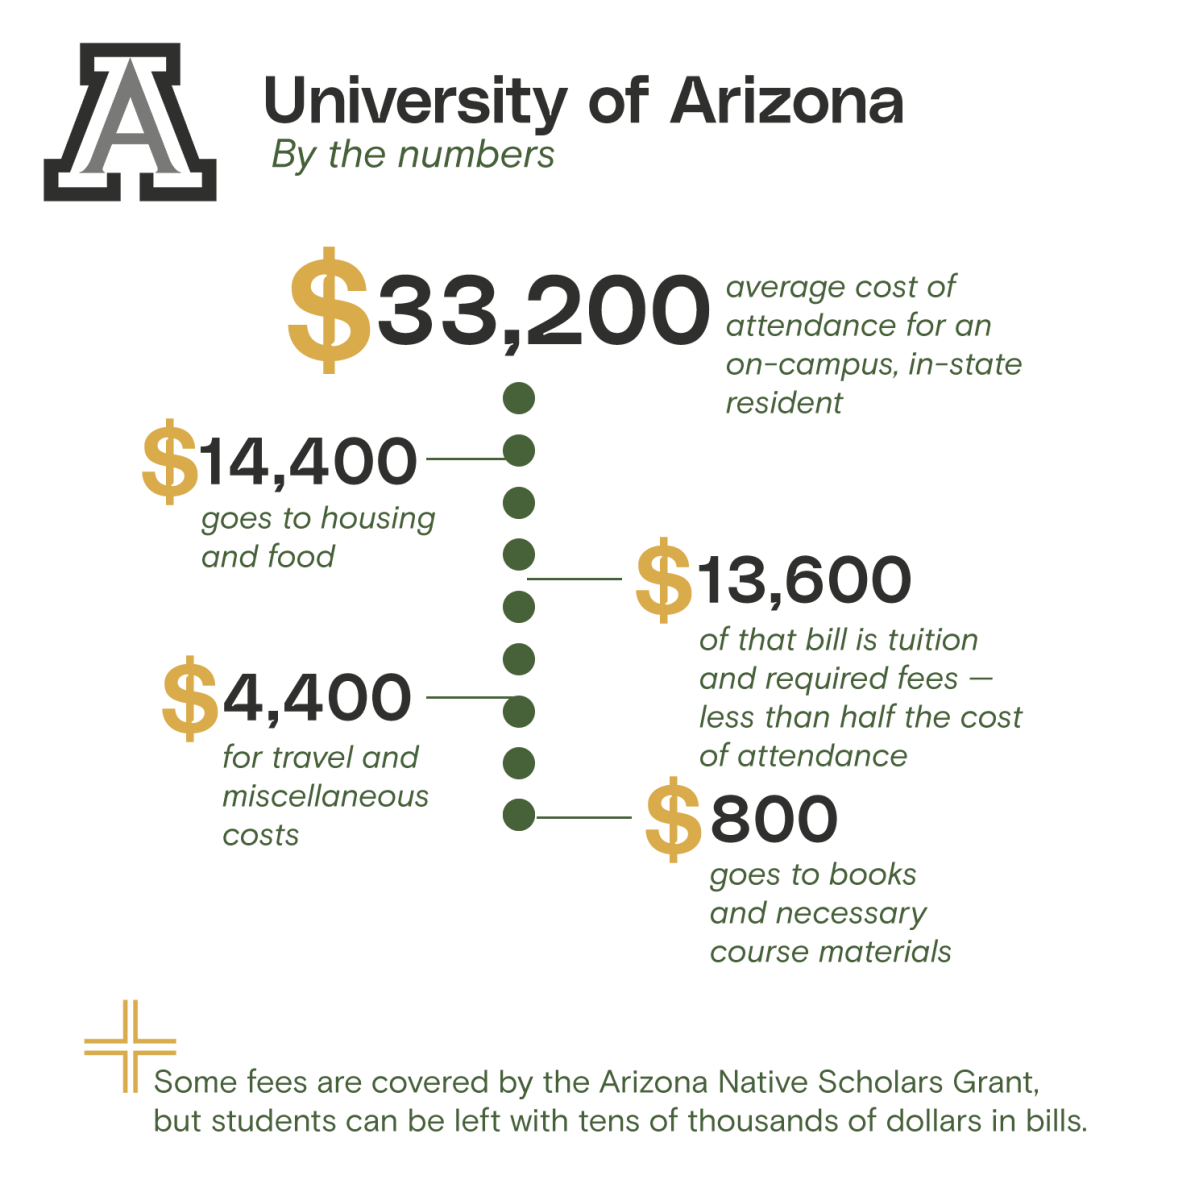 An infographic breaking down the cost of attendance at the University of Arizona.